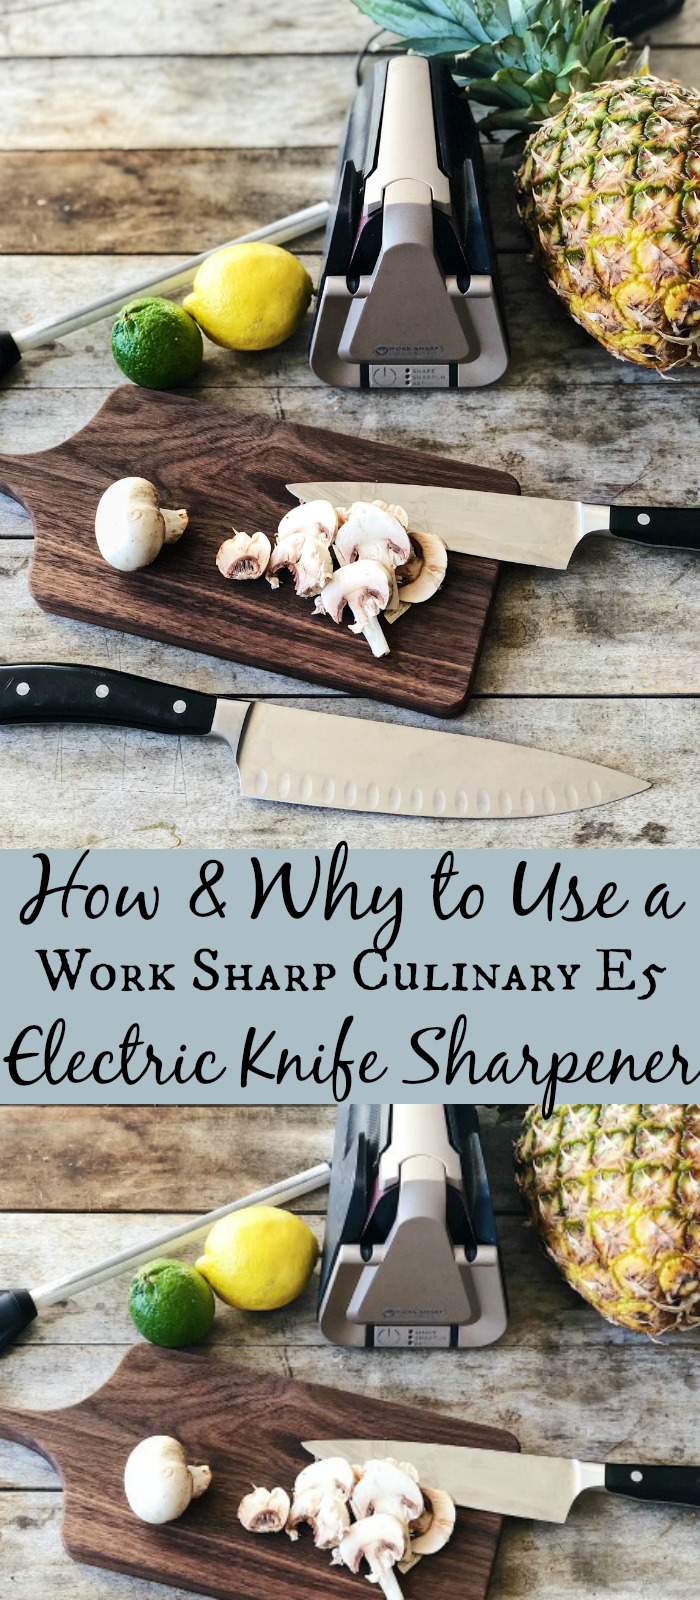 https://simplifylivelove.com/wp-content/uploads/2018/02/How-Why-to-Use-a-Work-Sharp-Culinary-E5-Electric-Knife-Sharpener-.jpg